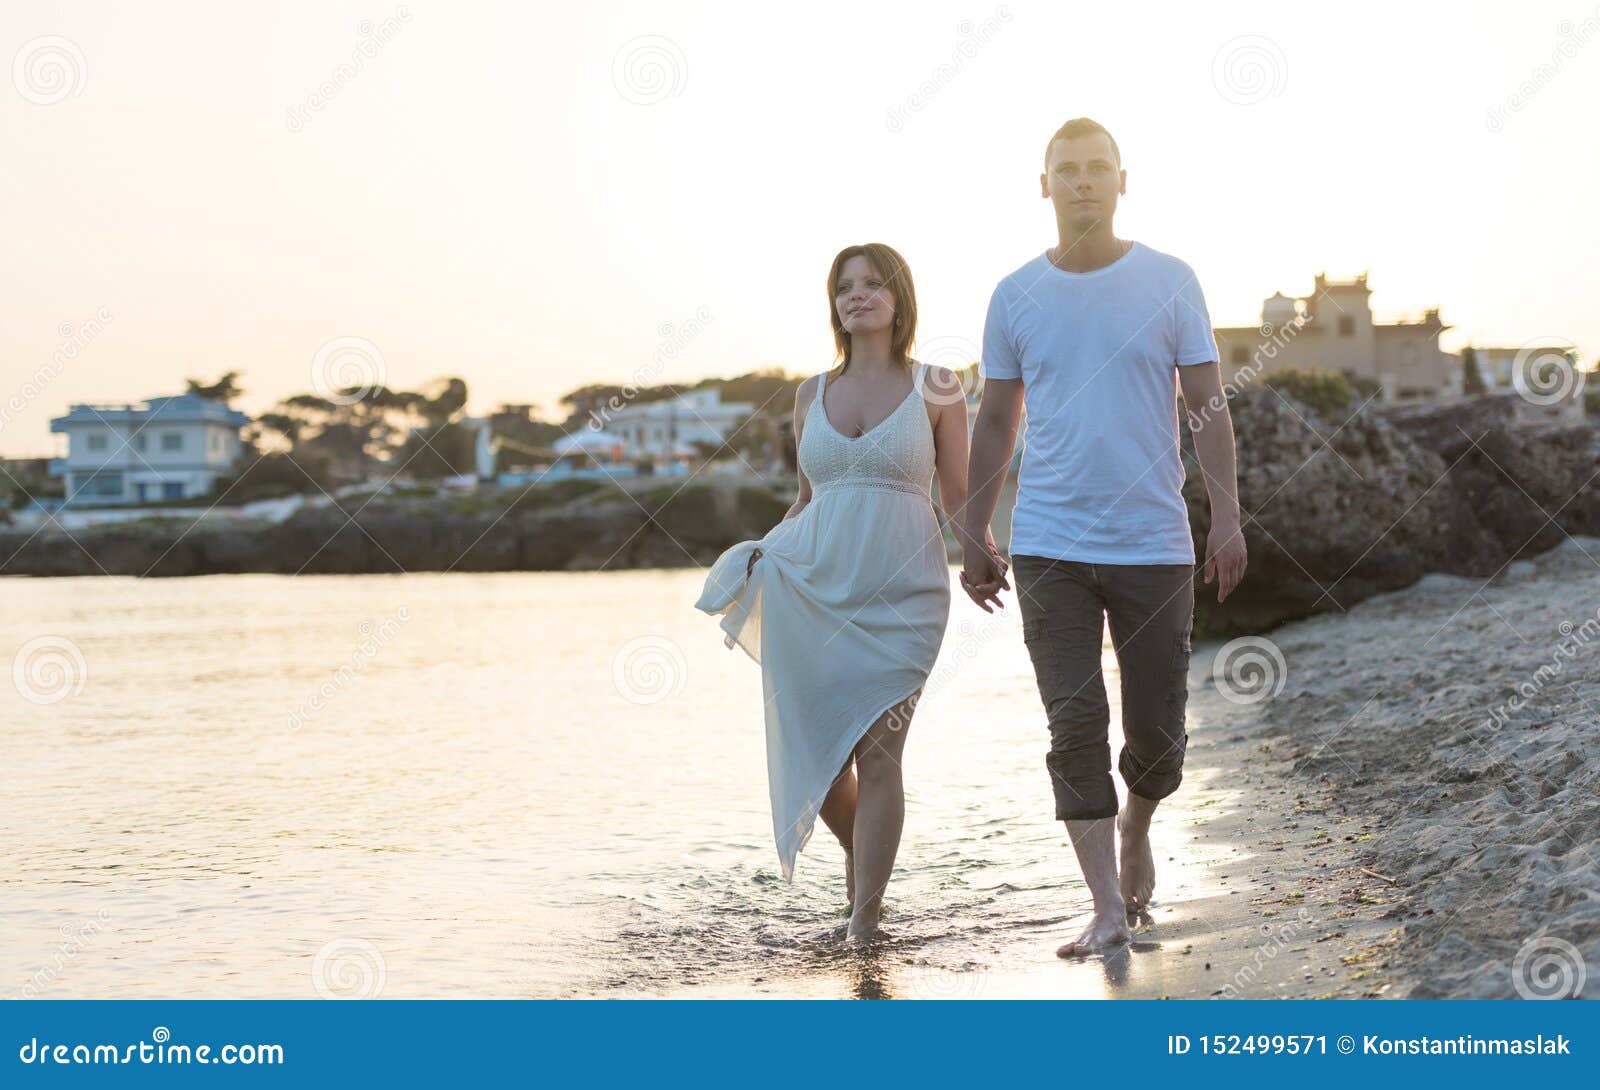 https://thumbs.dreamstime.com/z/young-man-woman-walking-beach-together-sunset-body-closeup-happy-romantic-middle-aged-couple-enjoying-beautiful-152499571.jpg